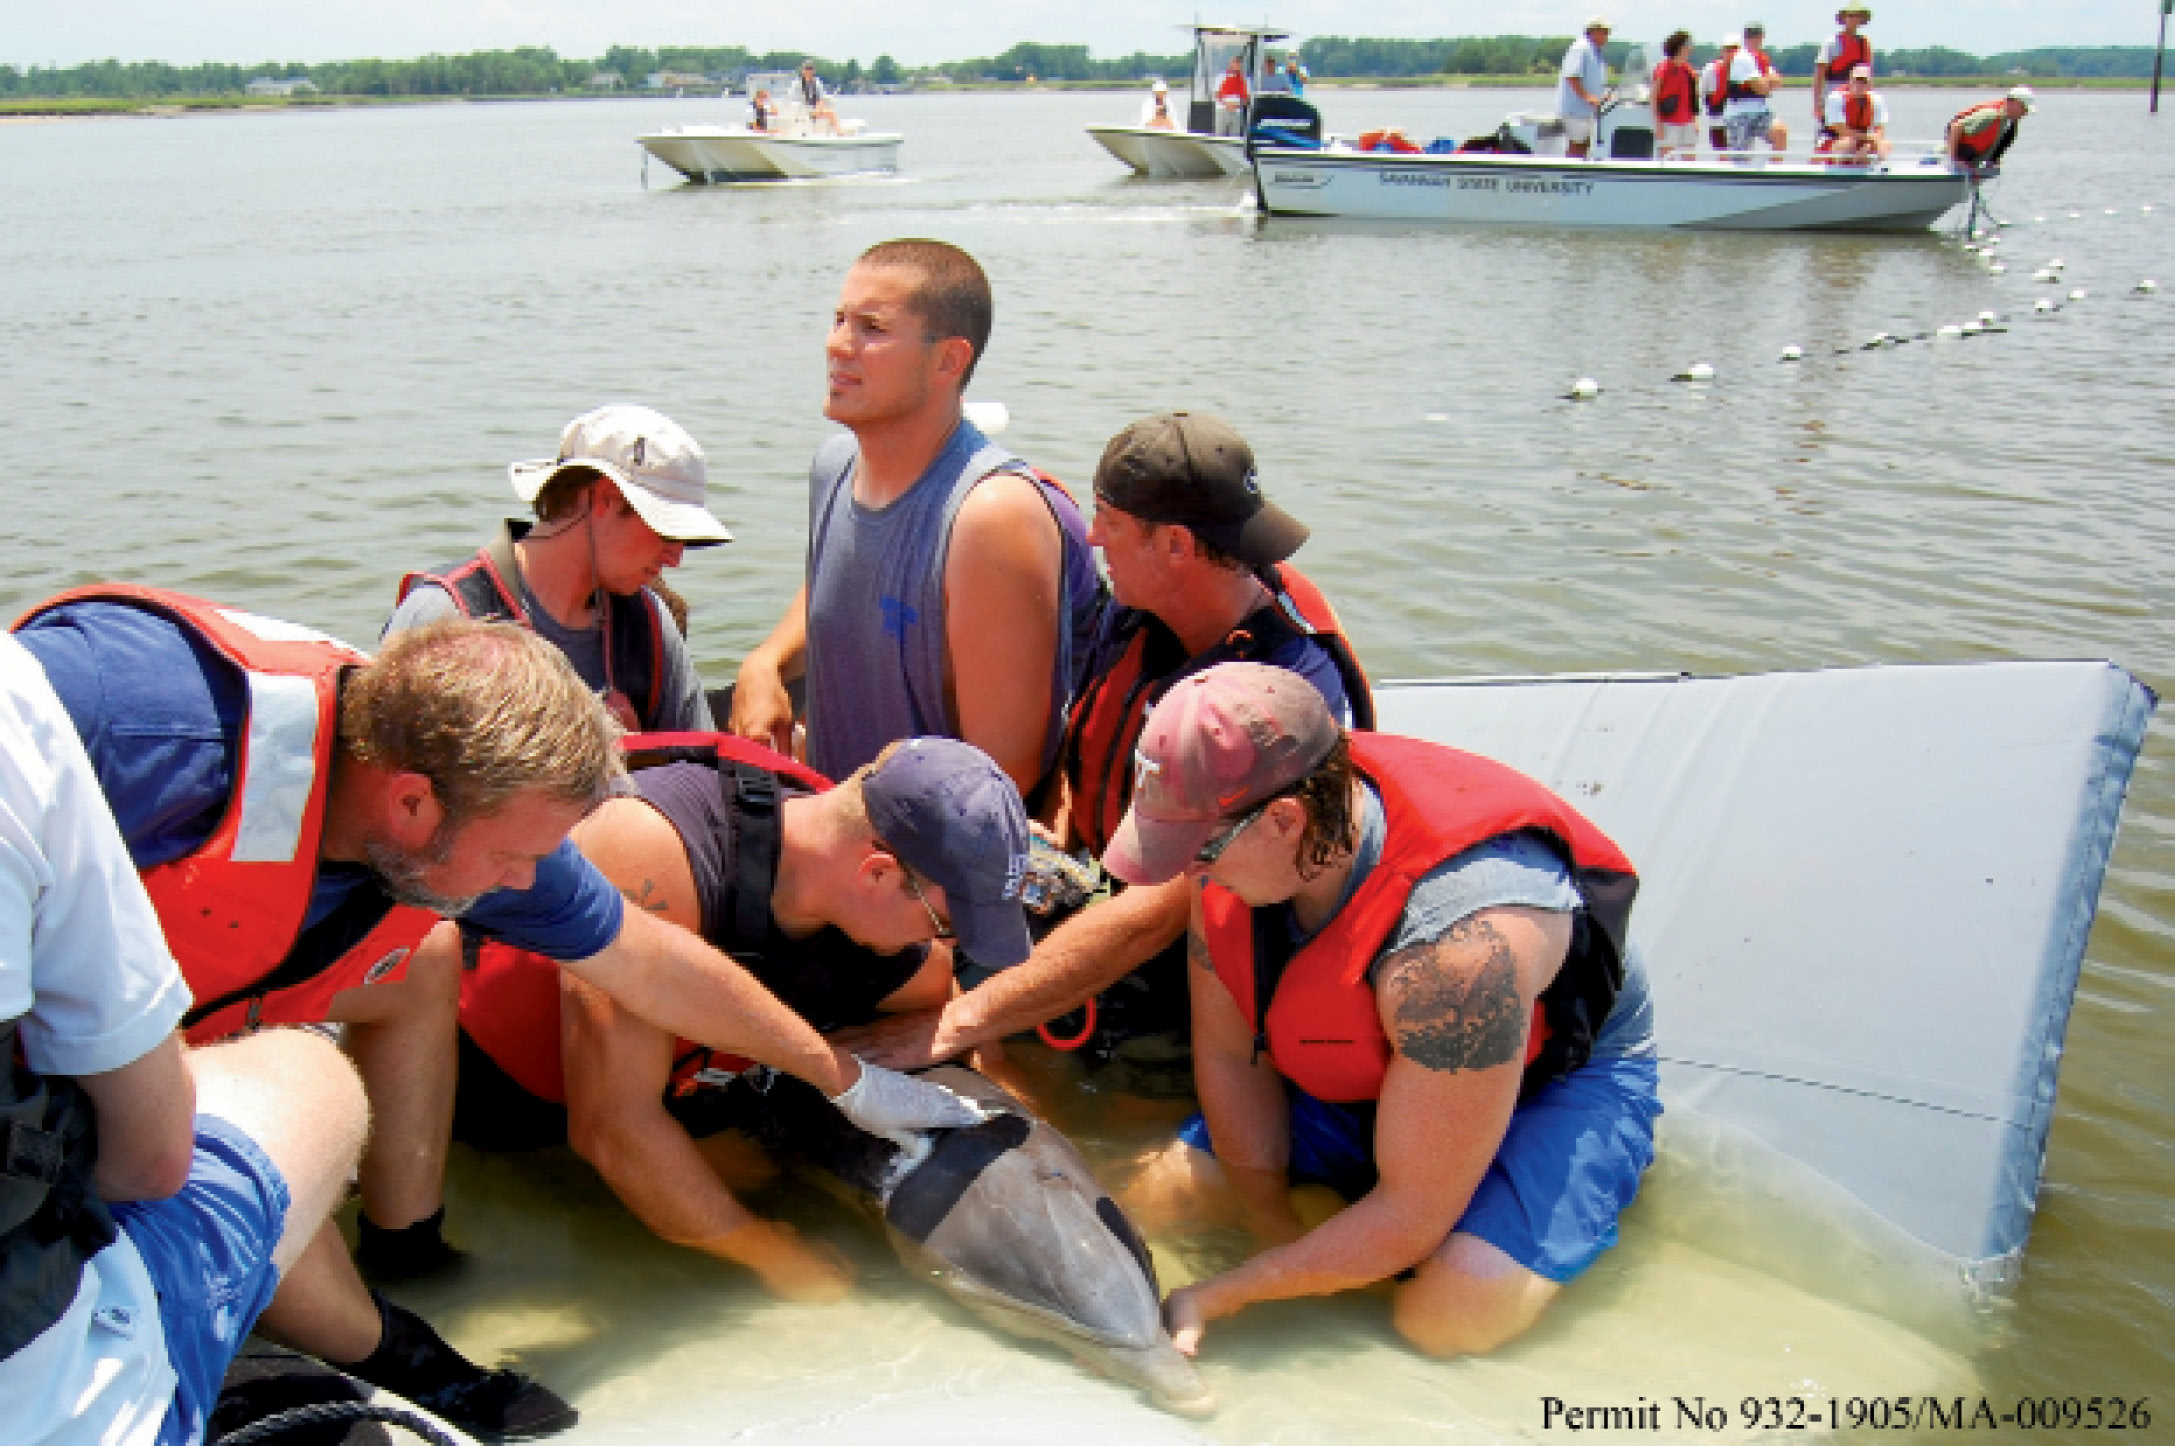 Dolphin R&amp;R (Rescue &amp; Research): National Ocean Service contractors, along with personnel from Harbor Branch Oceanographic, Georgia DNR, Bayside Hospital for Animals, Georgia Sea Turtle Center, UNC Wilmington, and Savannah State University, work to disentangle a sub-adult female bottlenose dolphin.